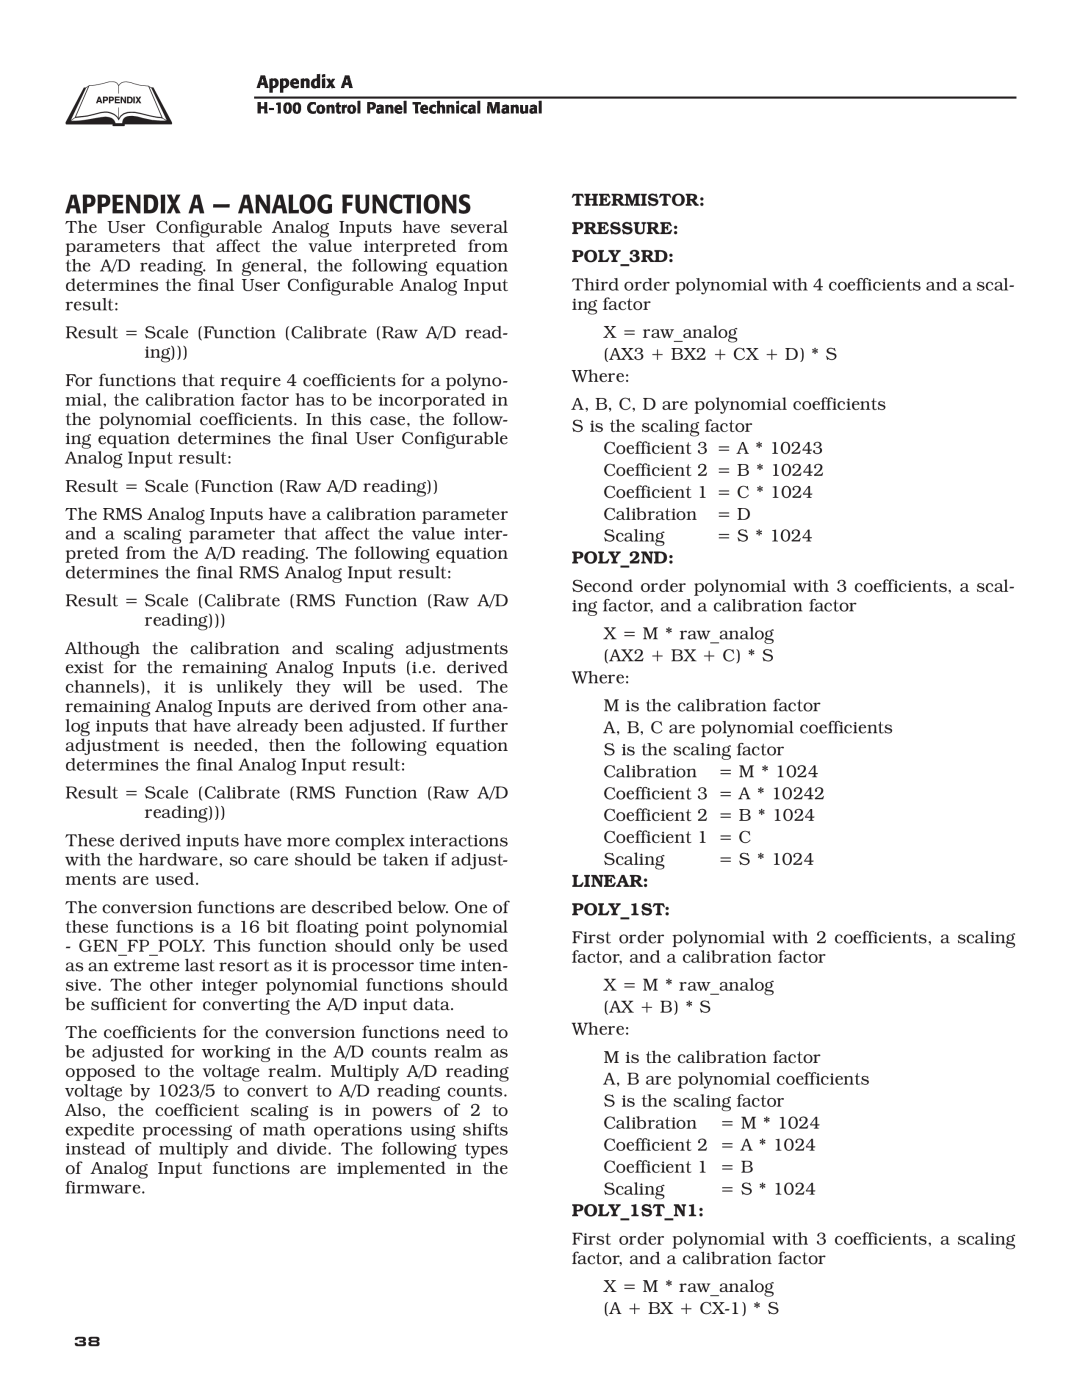 Generac Power Systems H-100 technical manual Appendix A - Analog Functions 